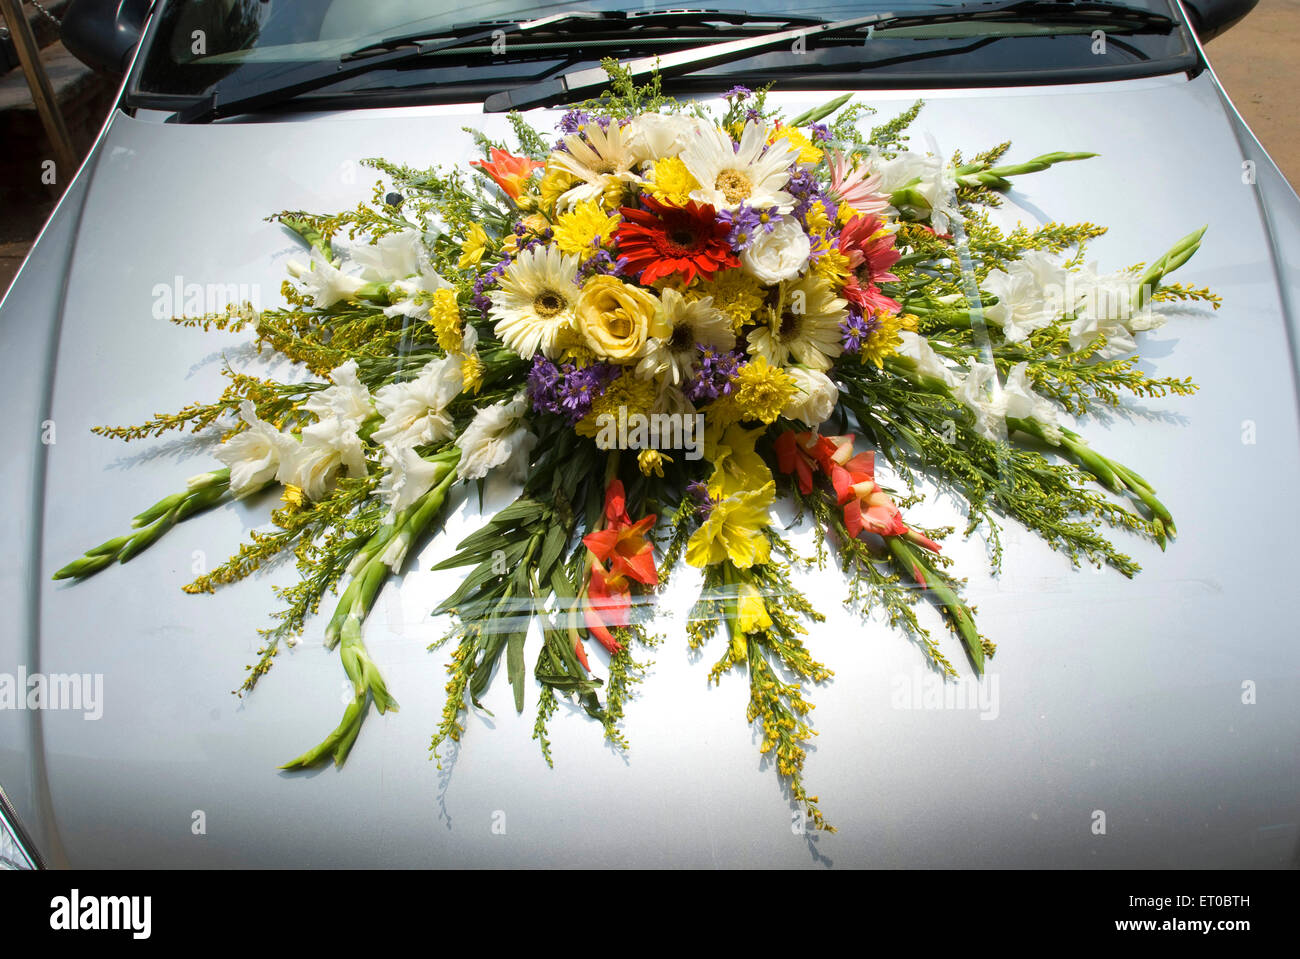 How To Make Wedding Car Decoration With Flowers, Car Decoration Interior